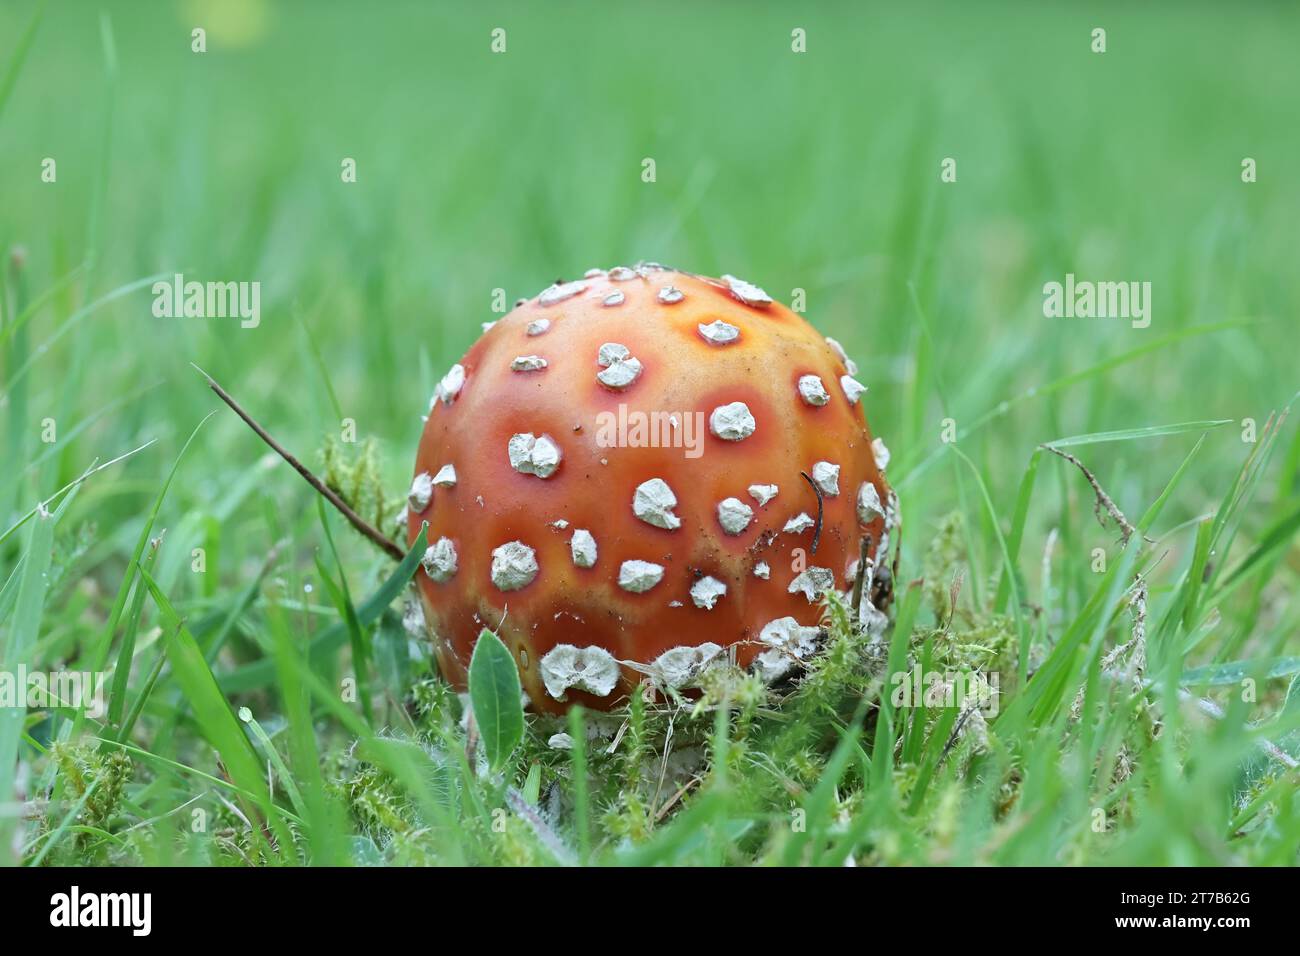 Amanita muscaria, commonly known as the fly agaric or fly amanita, poisonous mushroom from Finland Stock Photo